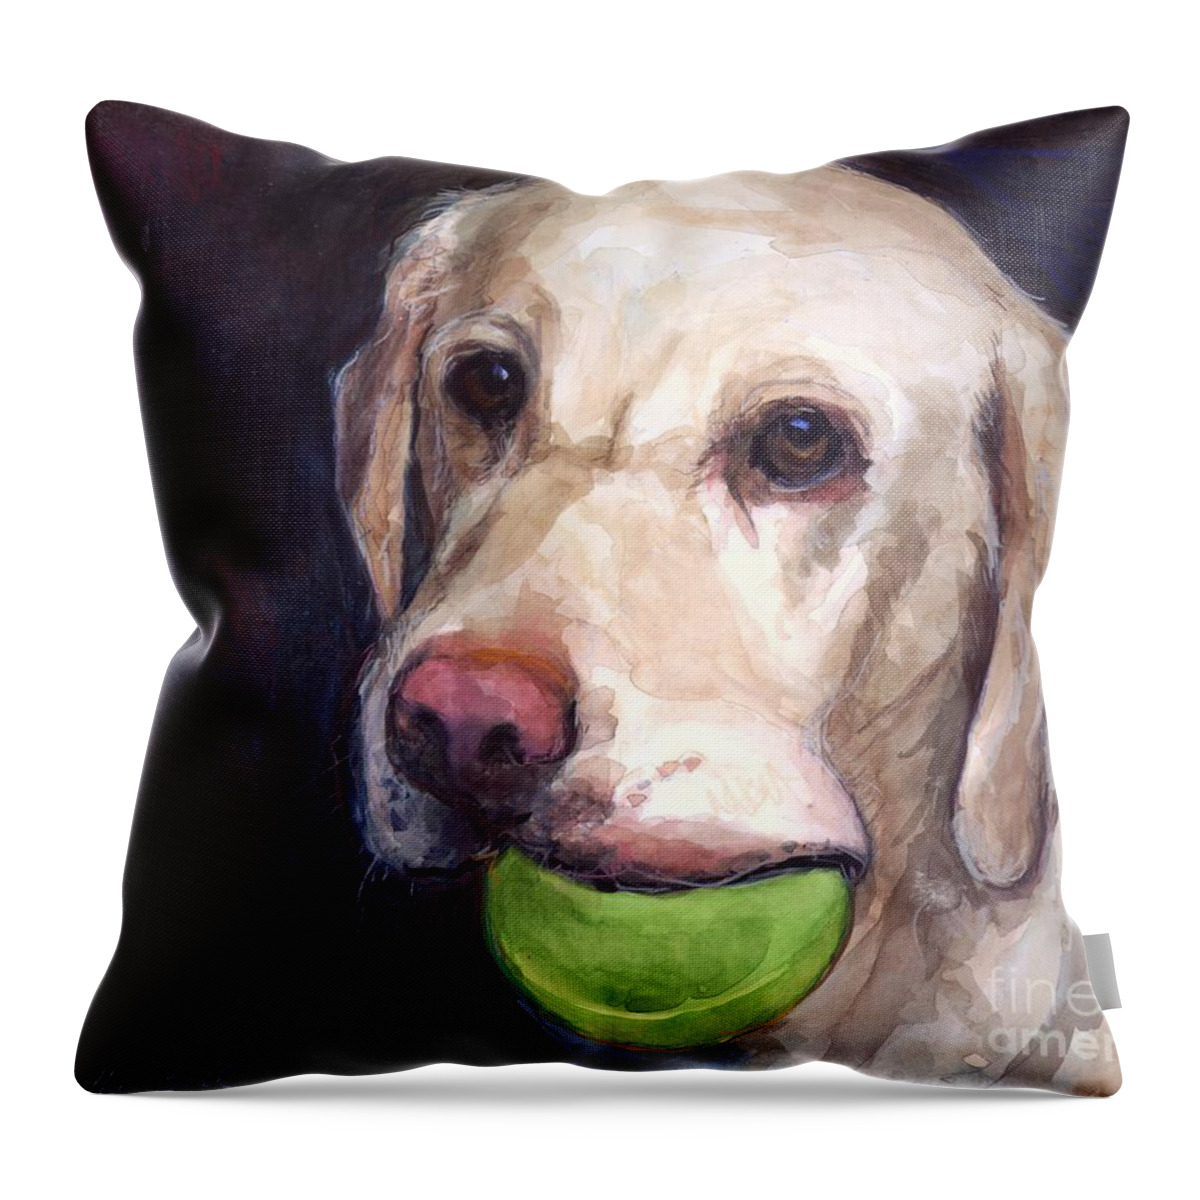 Yellow Labrador Retriever Throw Pillow featuring the painting Throw the Ball by Molly Poole